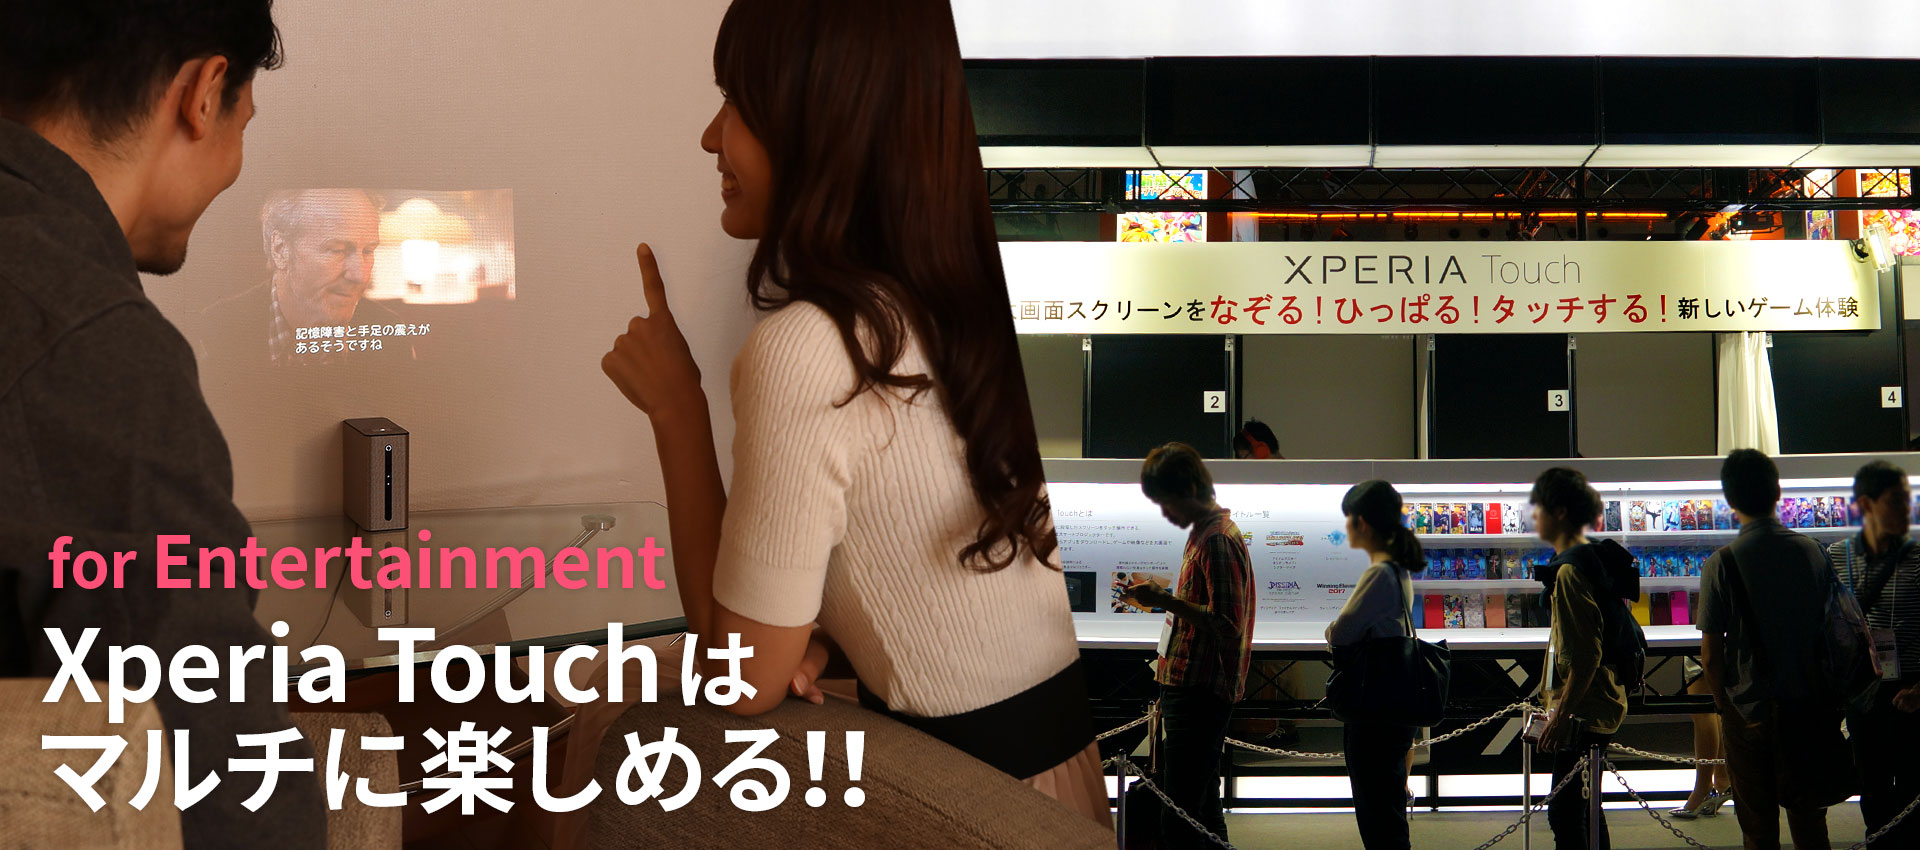 for Entertainment - Xperia Touchはマルチに楽しめる!!